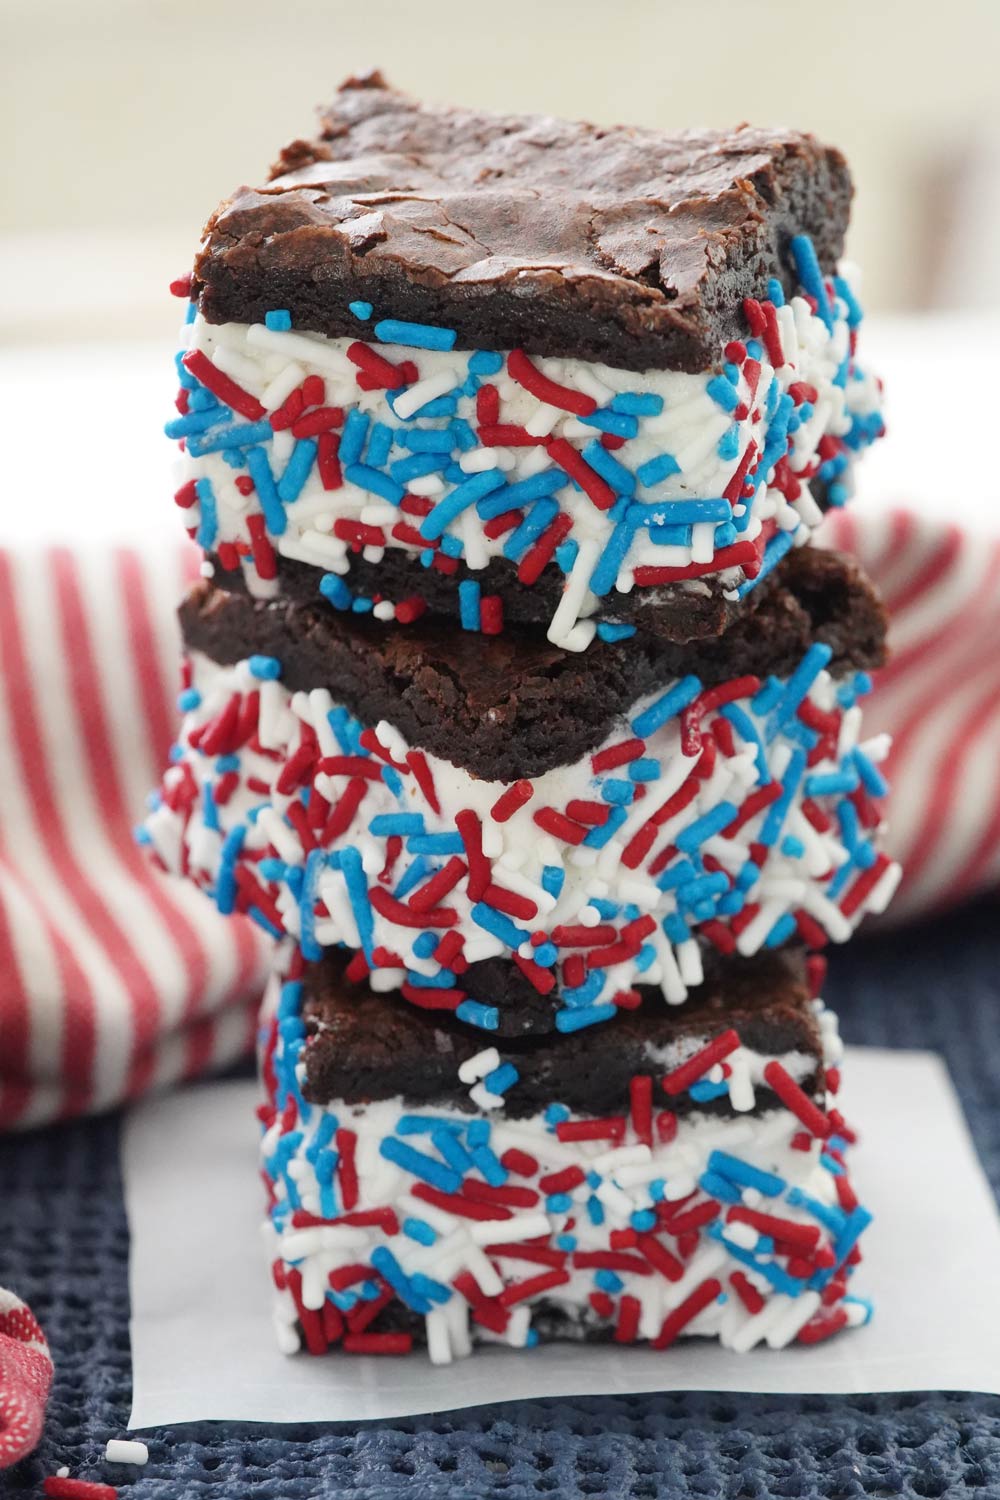 Festive 4th of July Brownie ice cream sandwiches rolled in red, white, and blue sprinkles